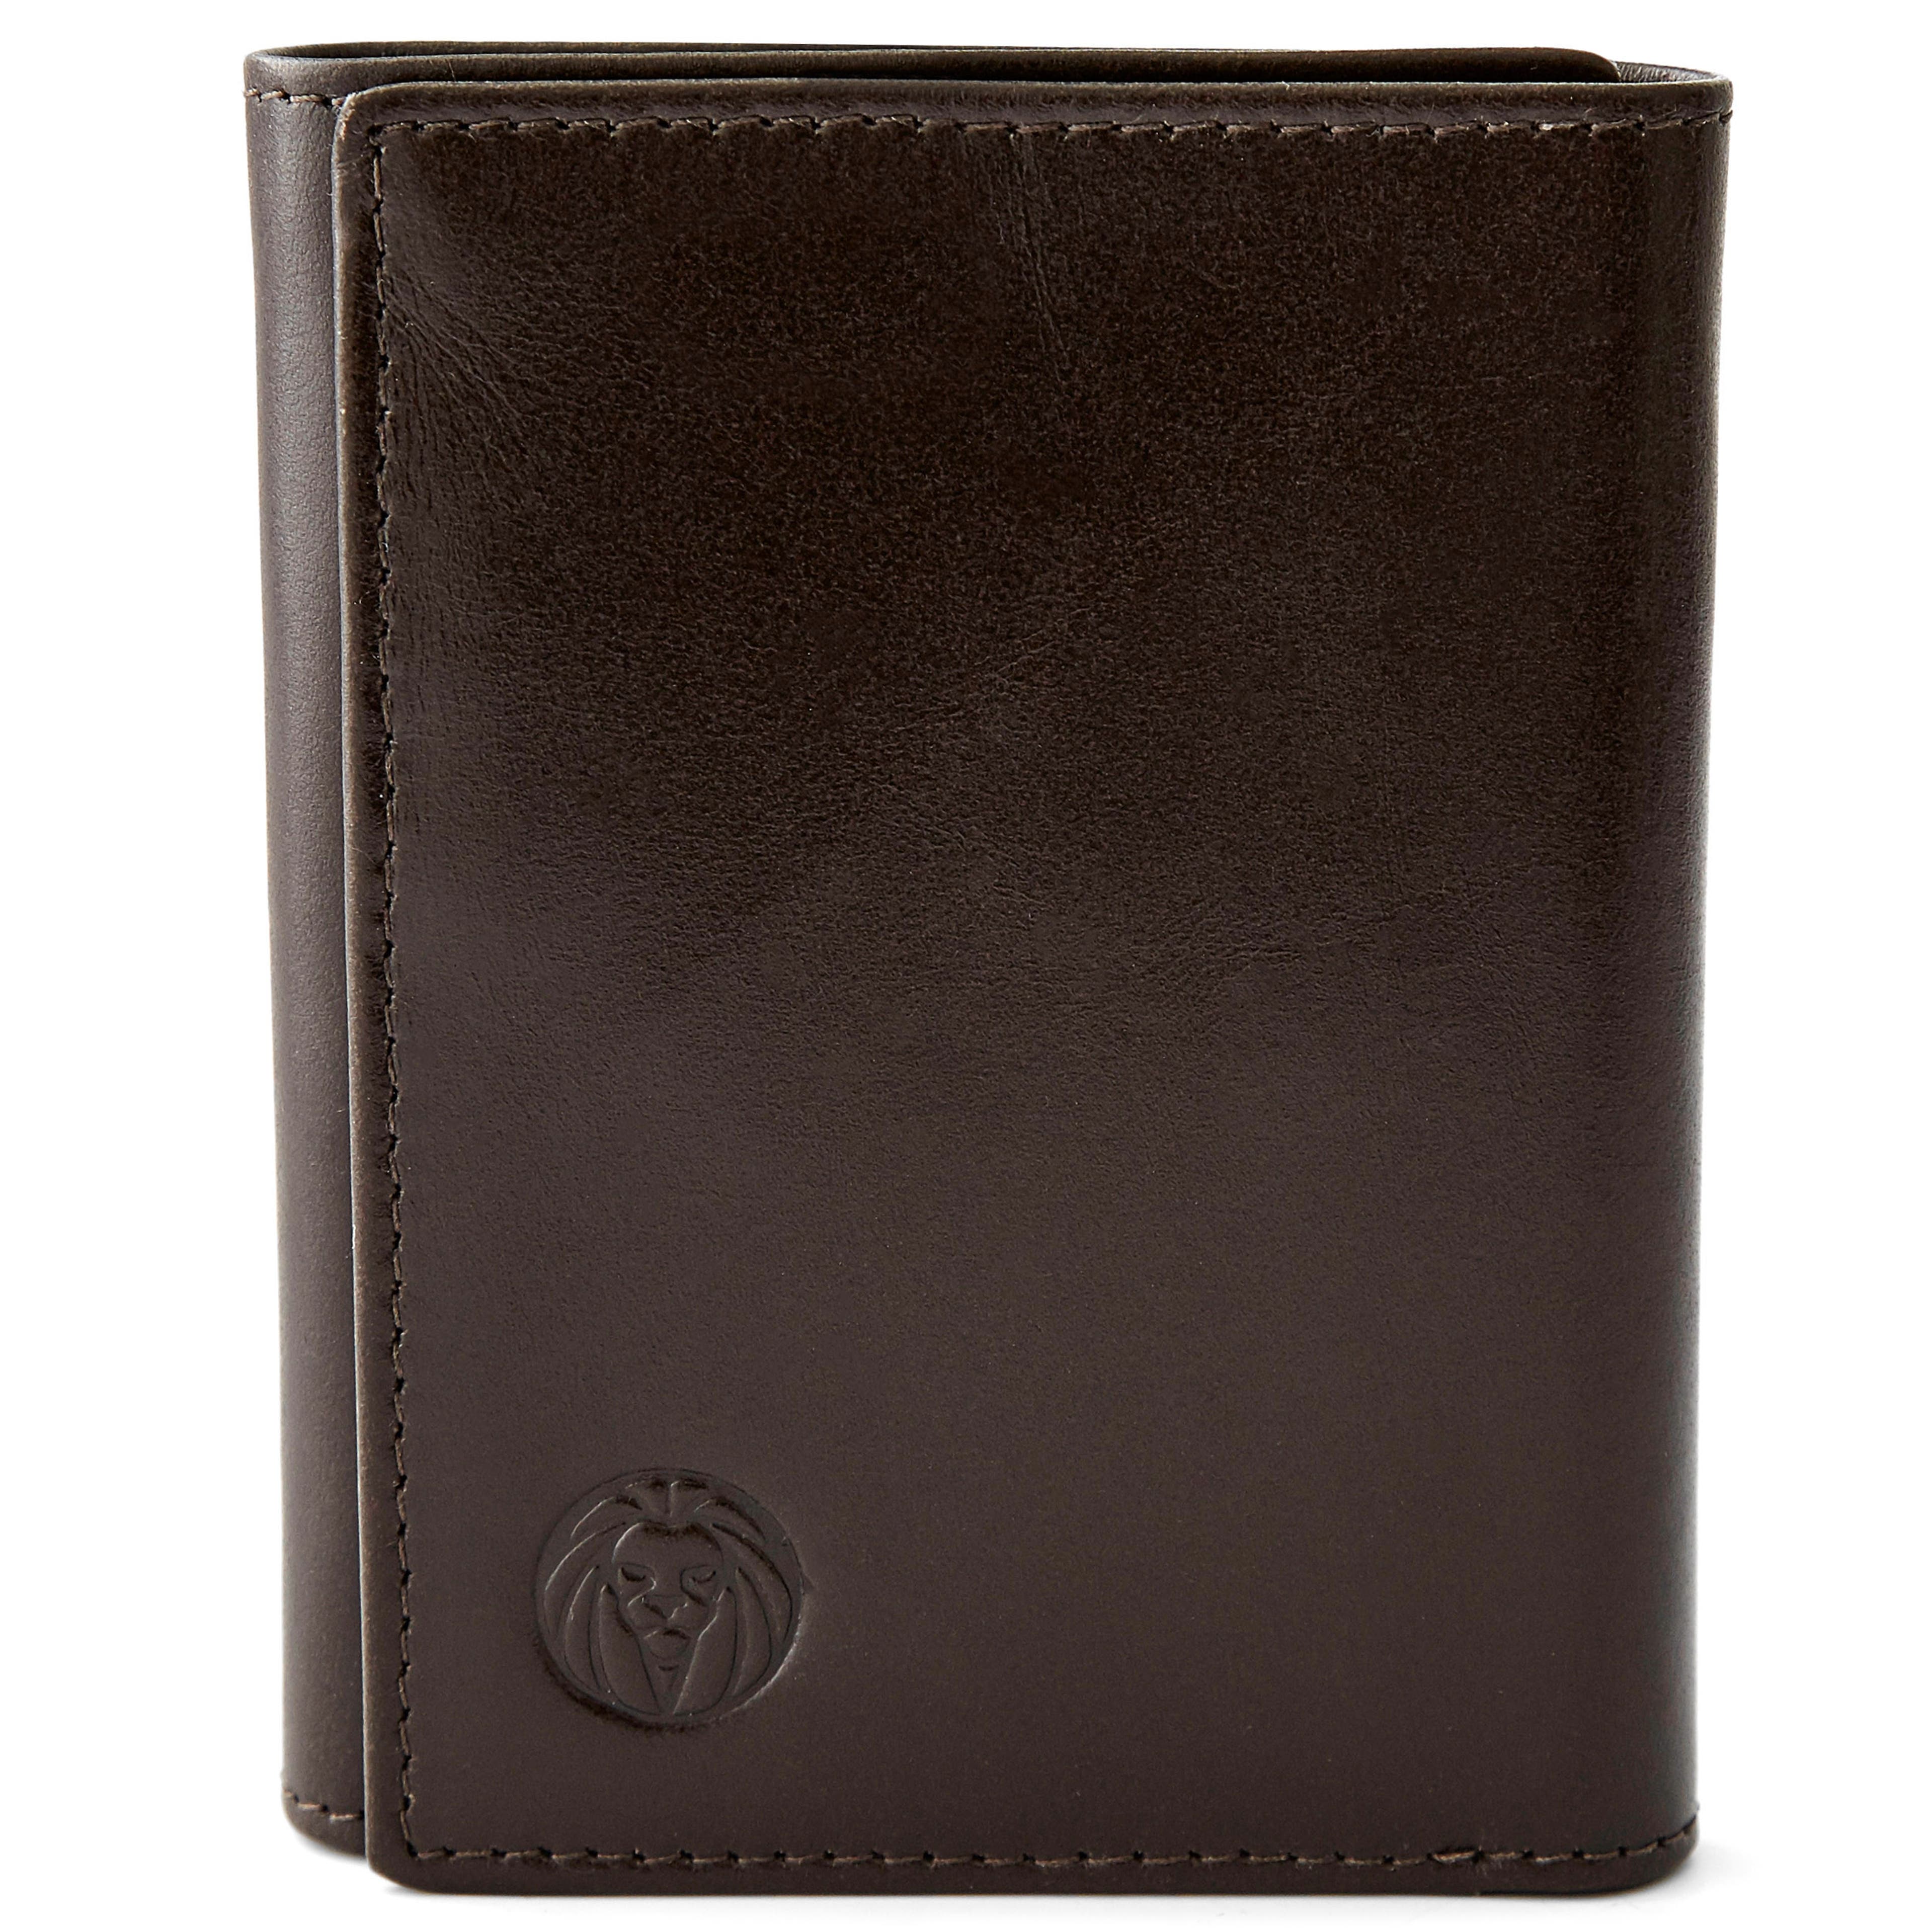 Brown Leather Trifold Wallet With RFID Blocker